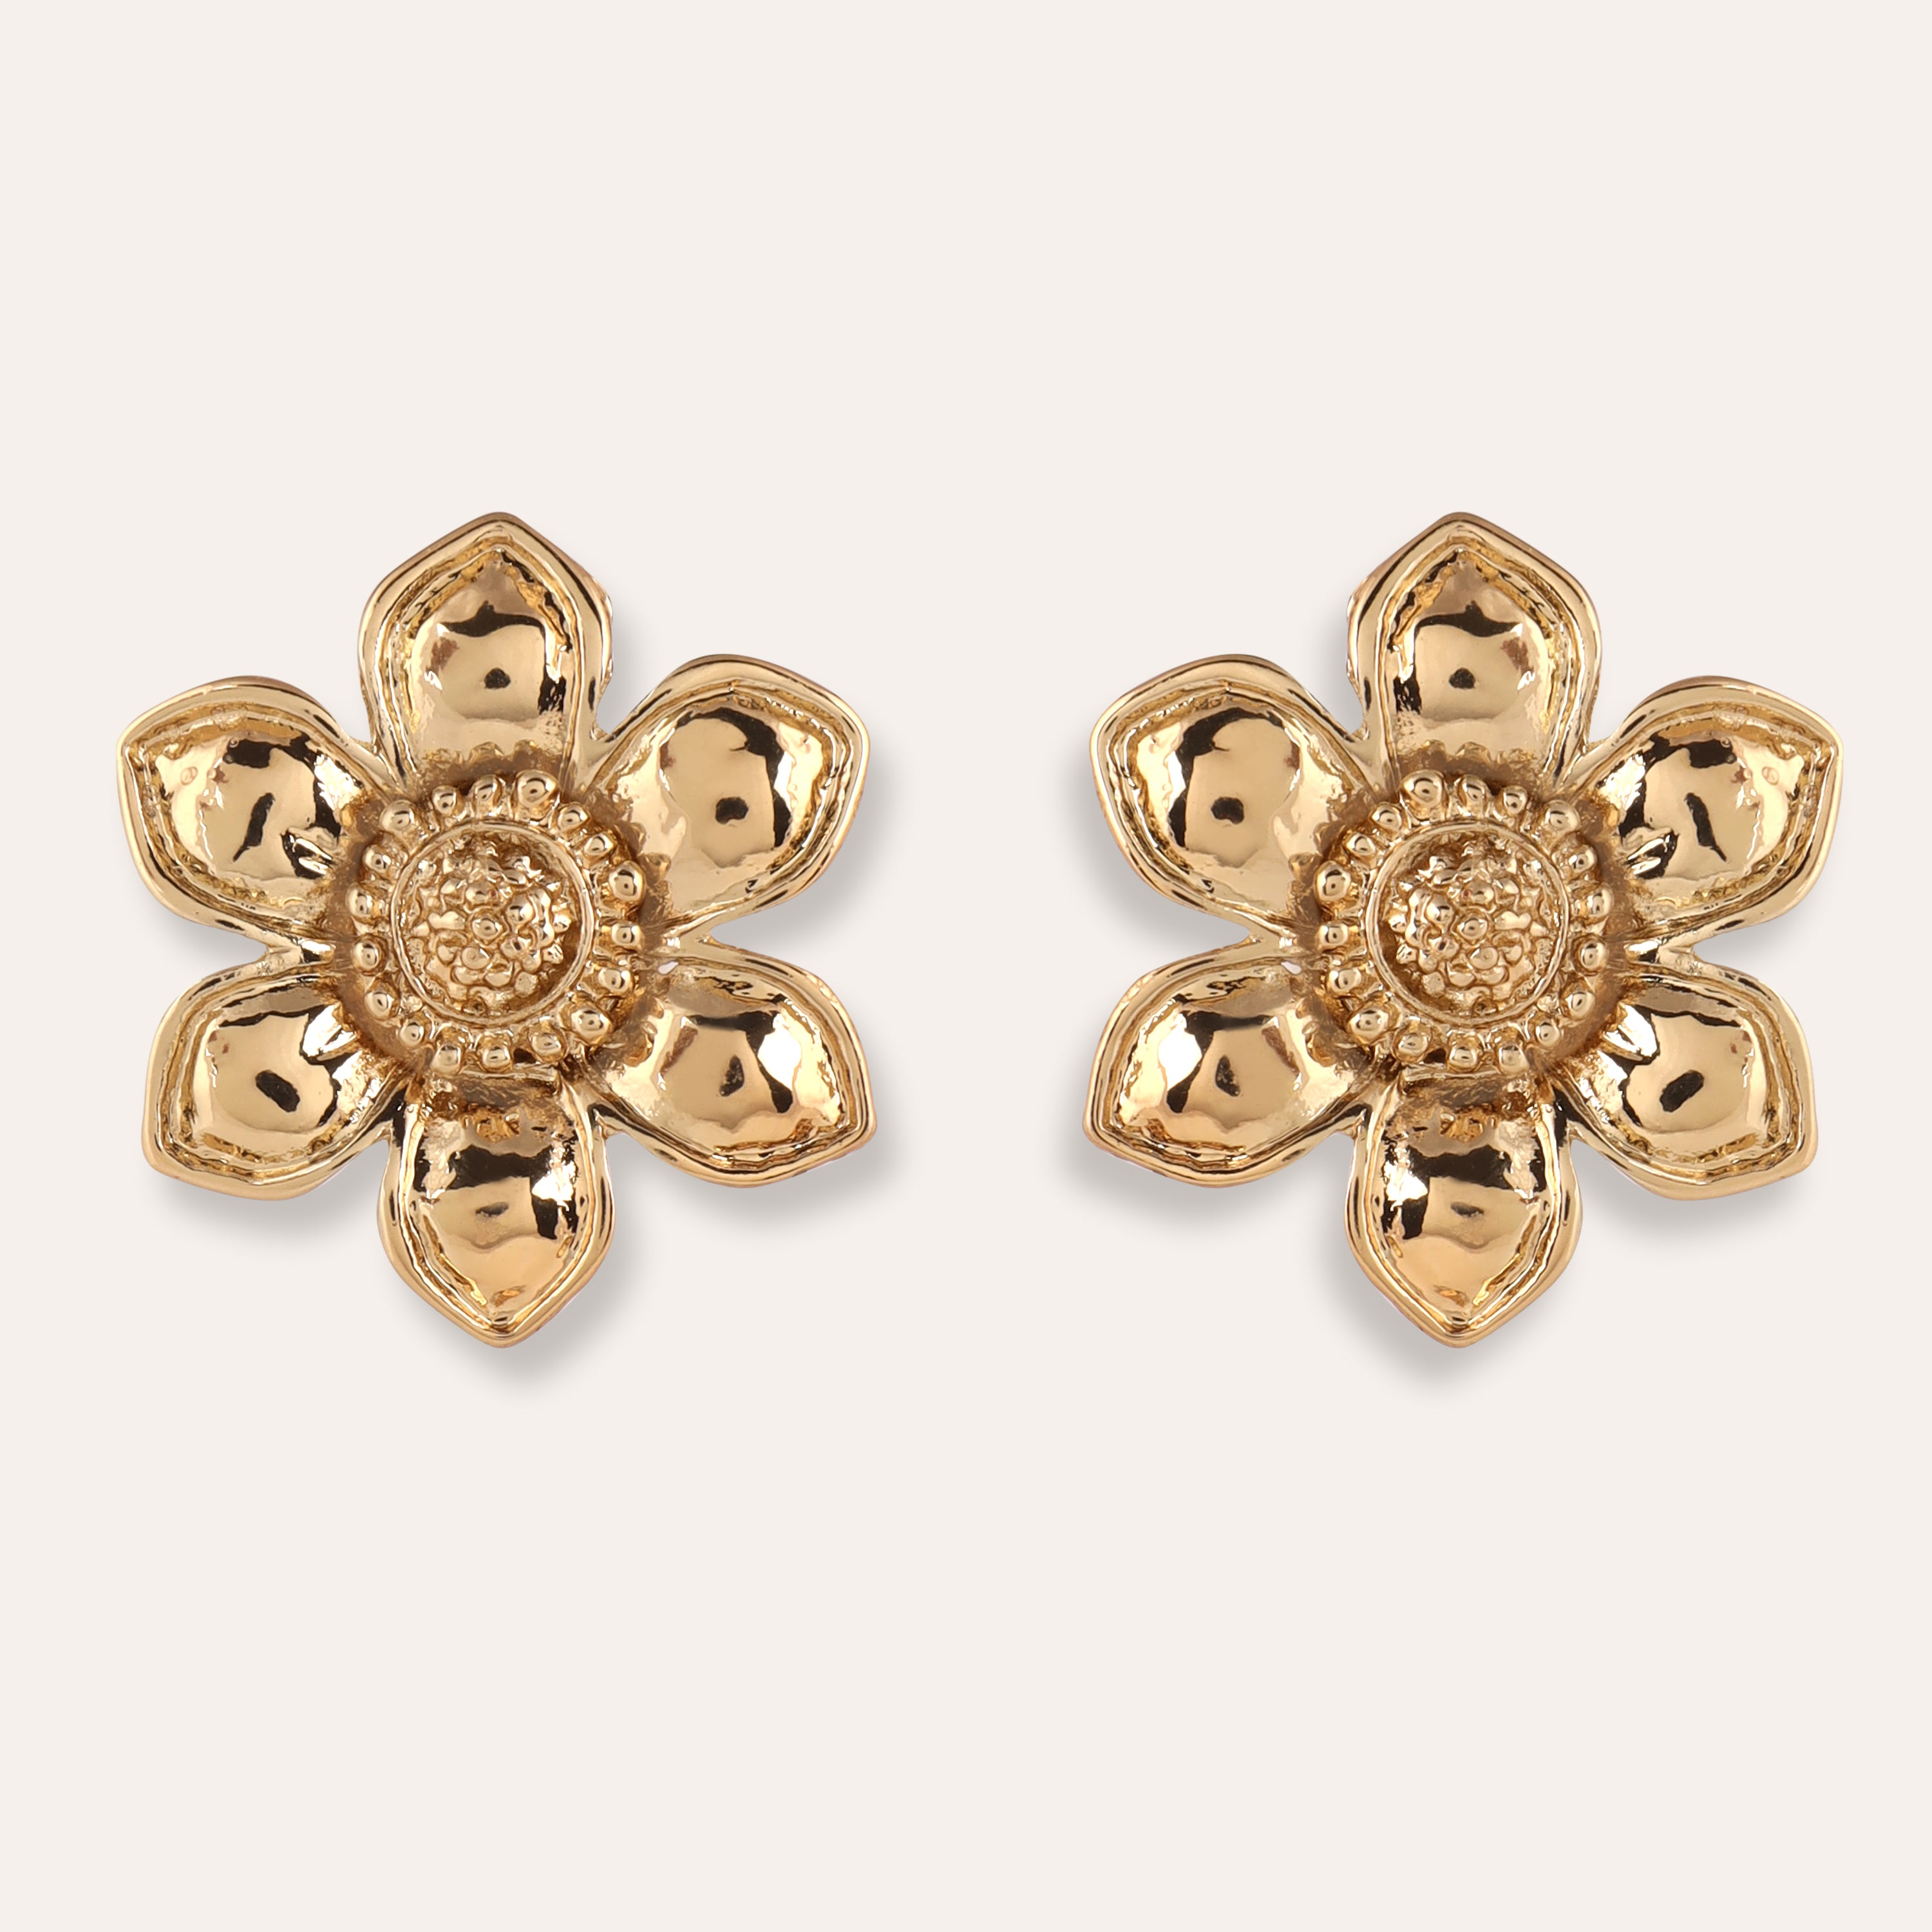 TFC Daisy Darling Gold Plated Stud Earrings- Discover daily wear gold earrings including stud earrings, hoop earrings, and pearl earrings, perfect as earrings for women and earrings for girls.Find the cheapest fashion jewellery which is anti-tarnis​h only at The Fun companyTFC Daisy Darling Gold Plated Stud EarringsTFC Daisy Darling Gold Plated Stud Earrings